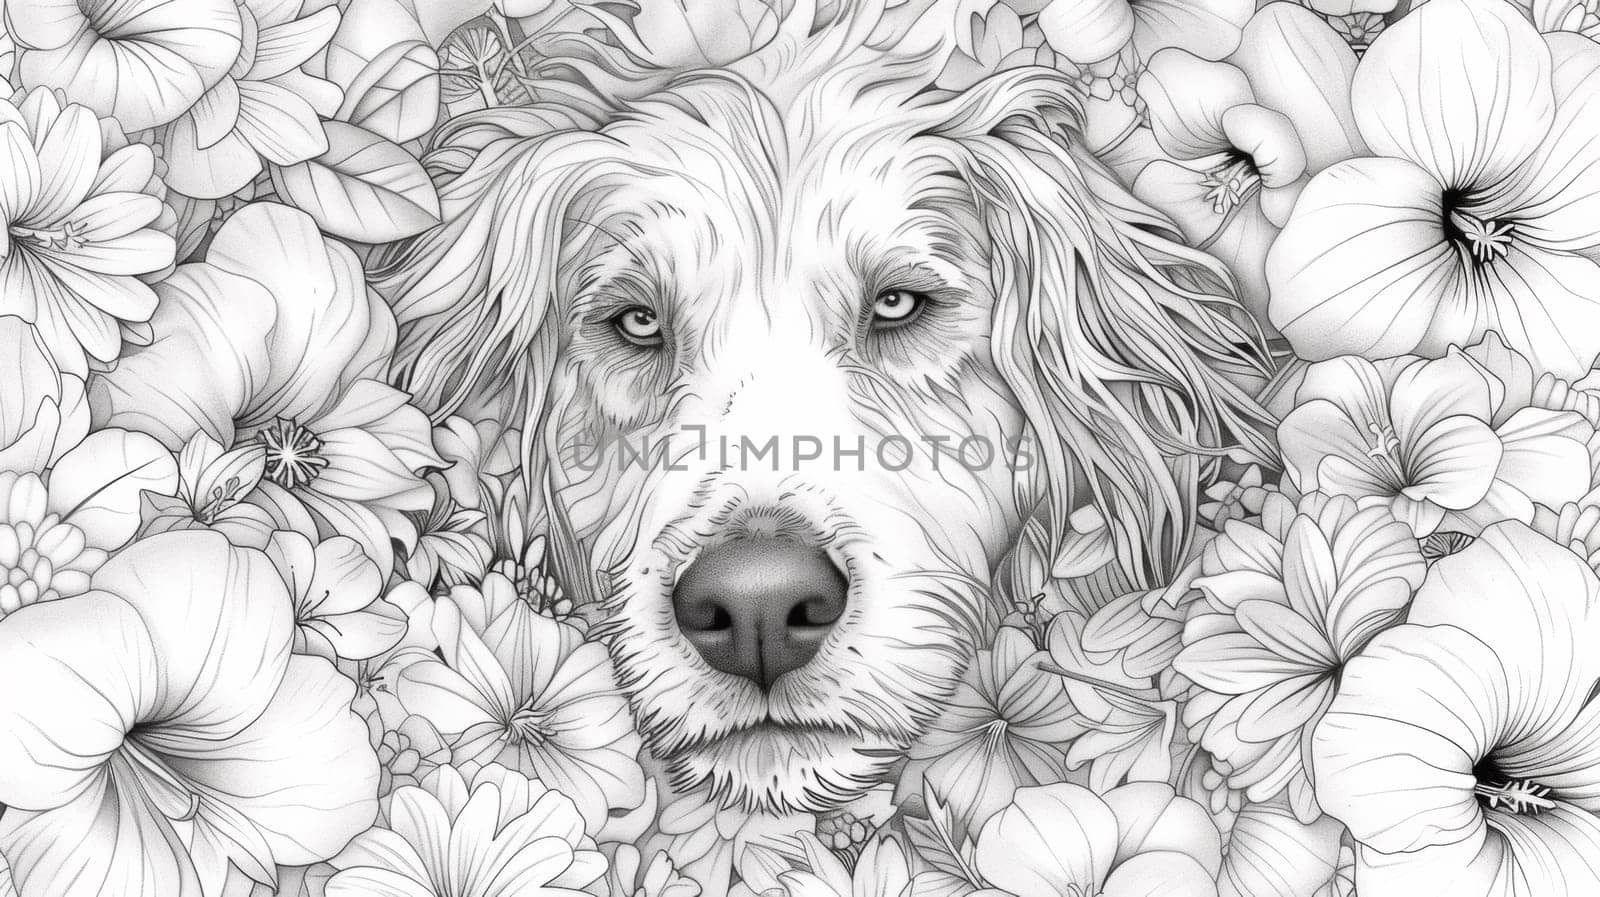 A dog is surrounded by flowers in a coloring book